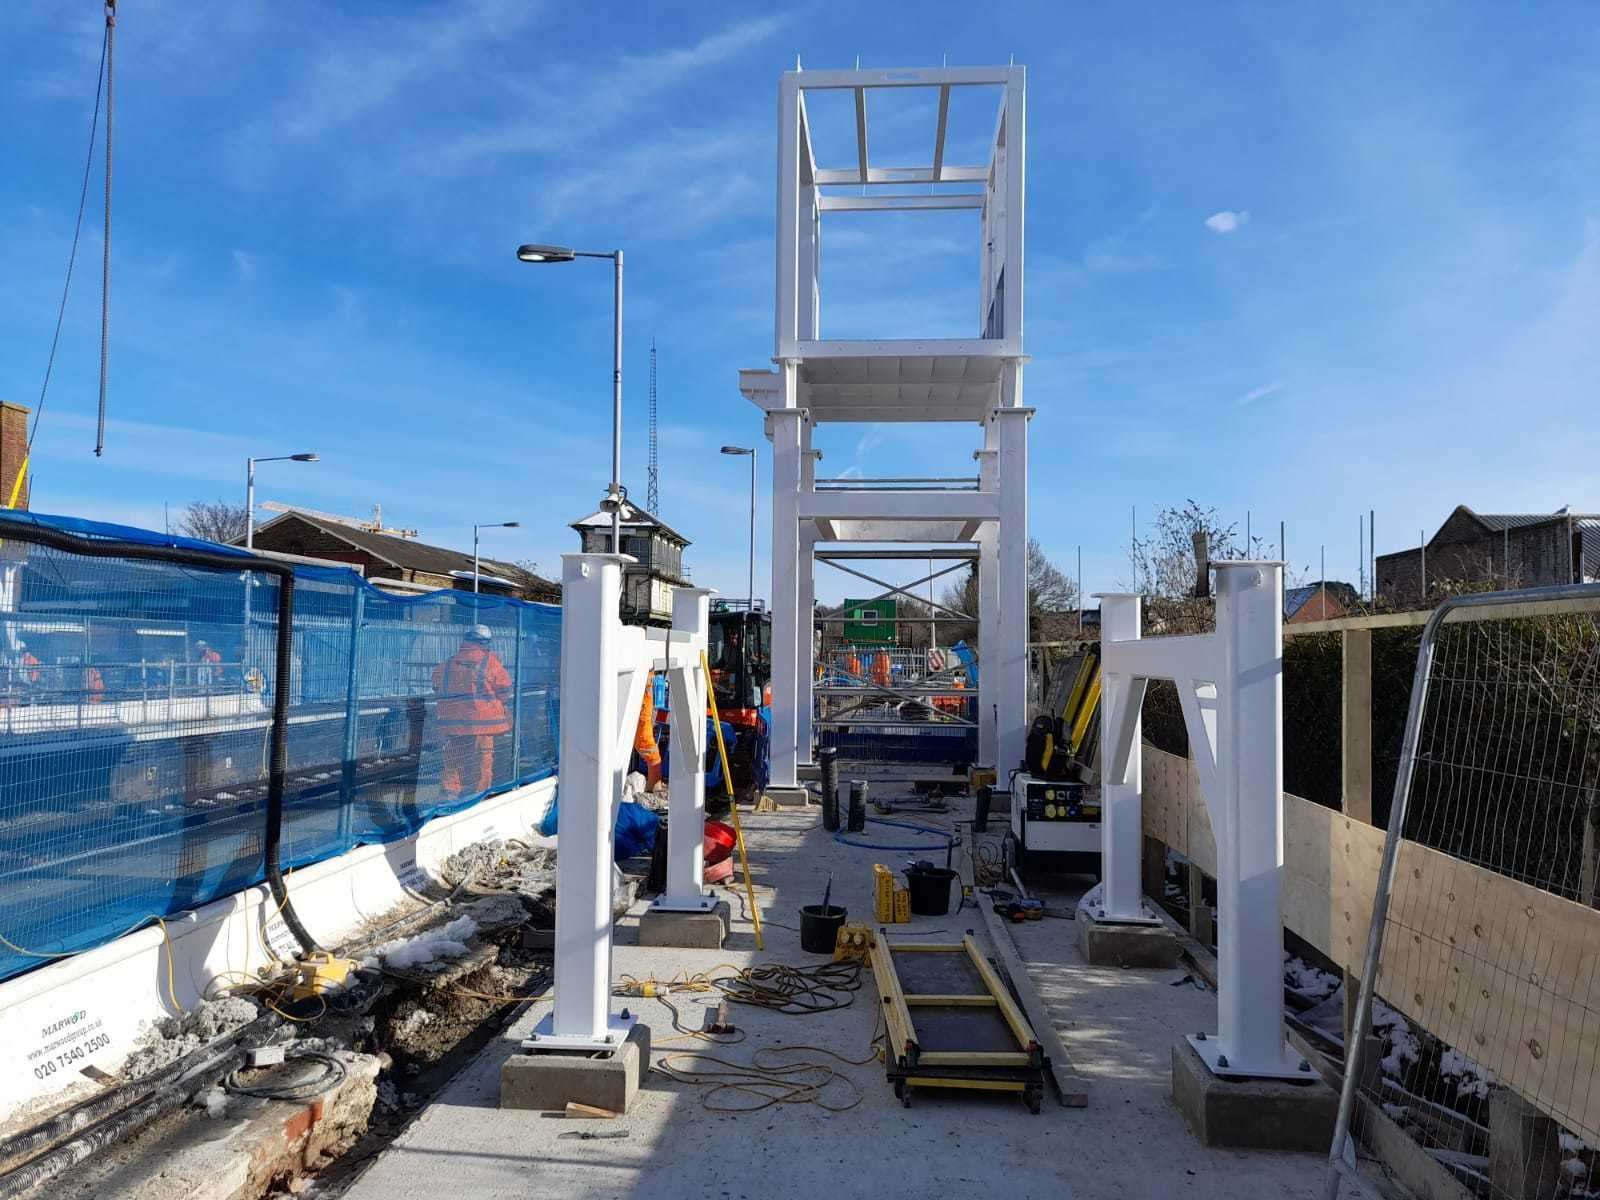 The £4.8 million scheme is aimed to improve accessibility at Canterbury East